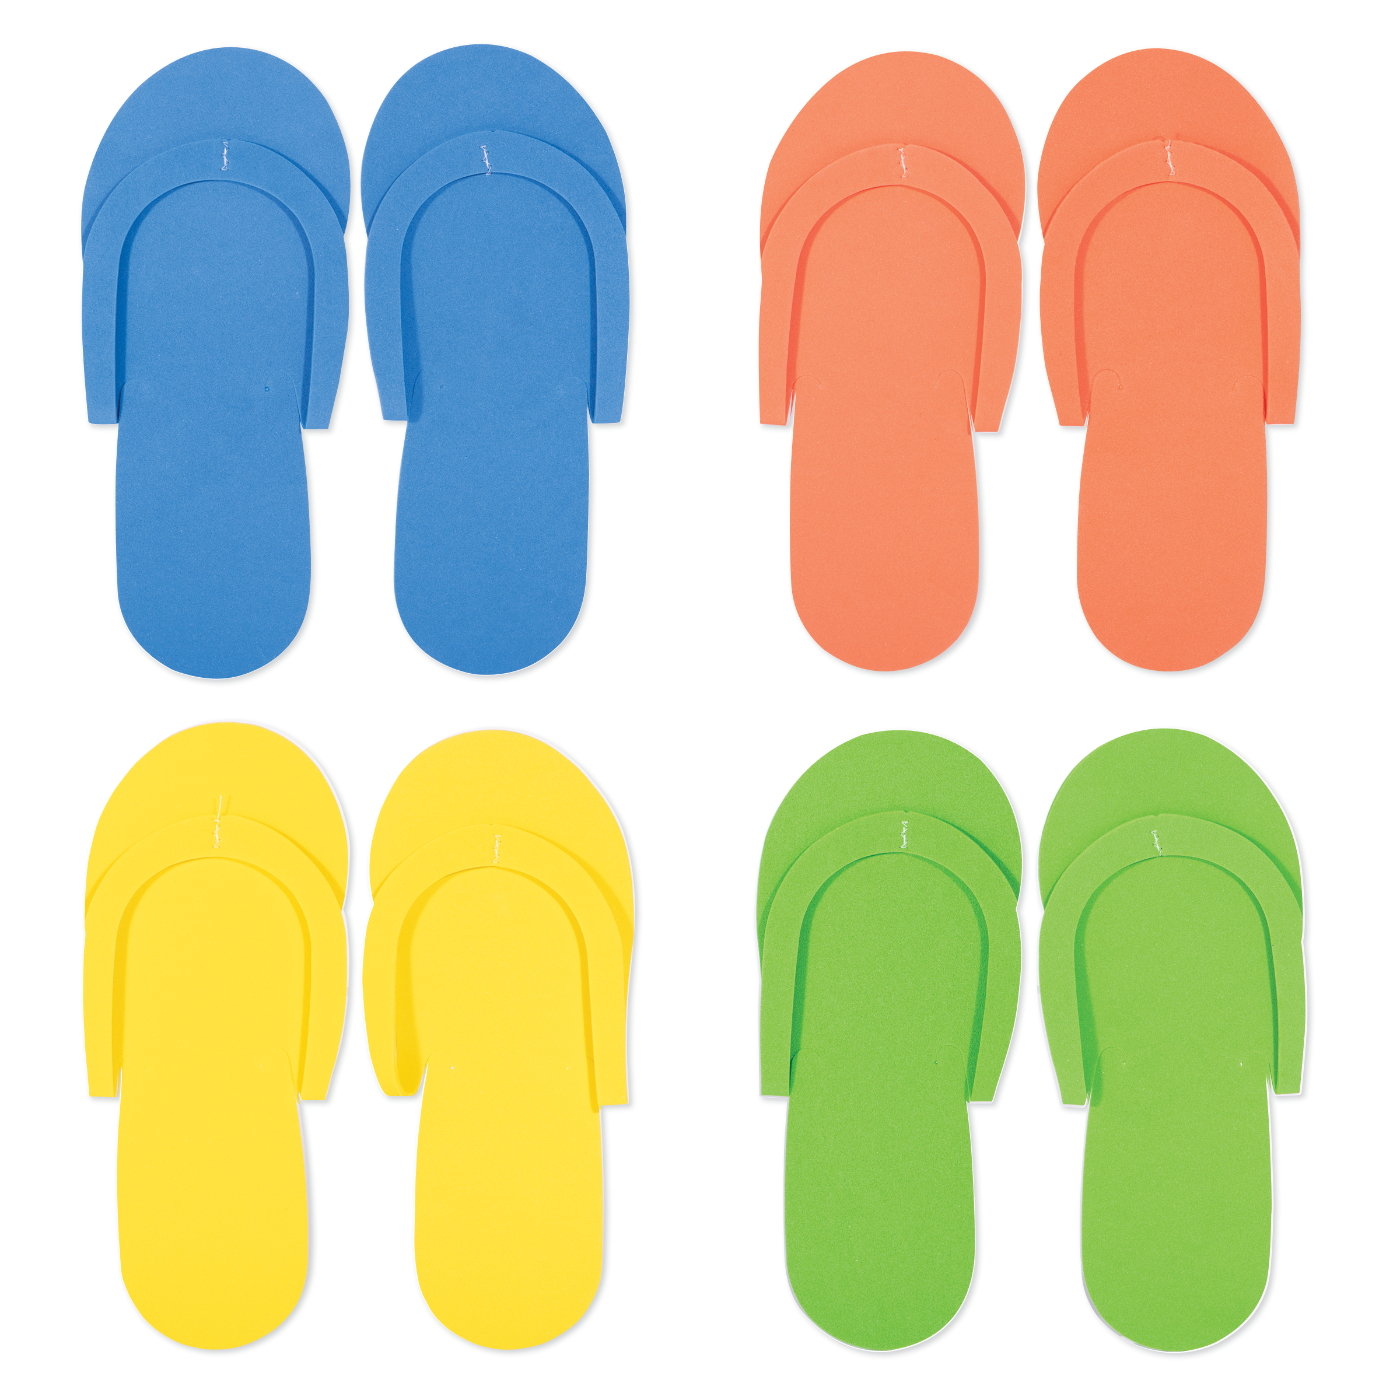 Pedislippers, Assorted Colors - 12 pairs